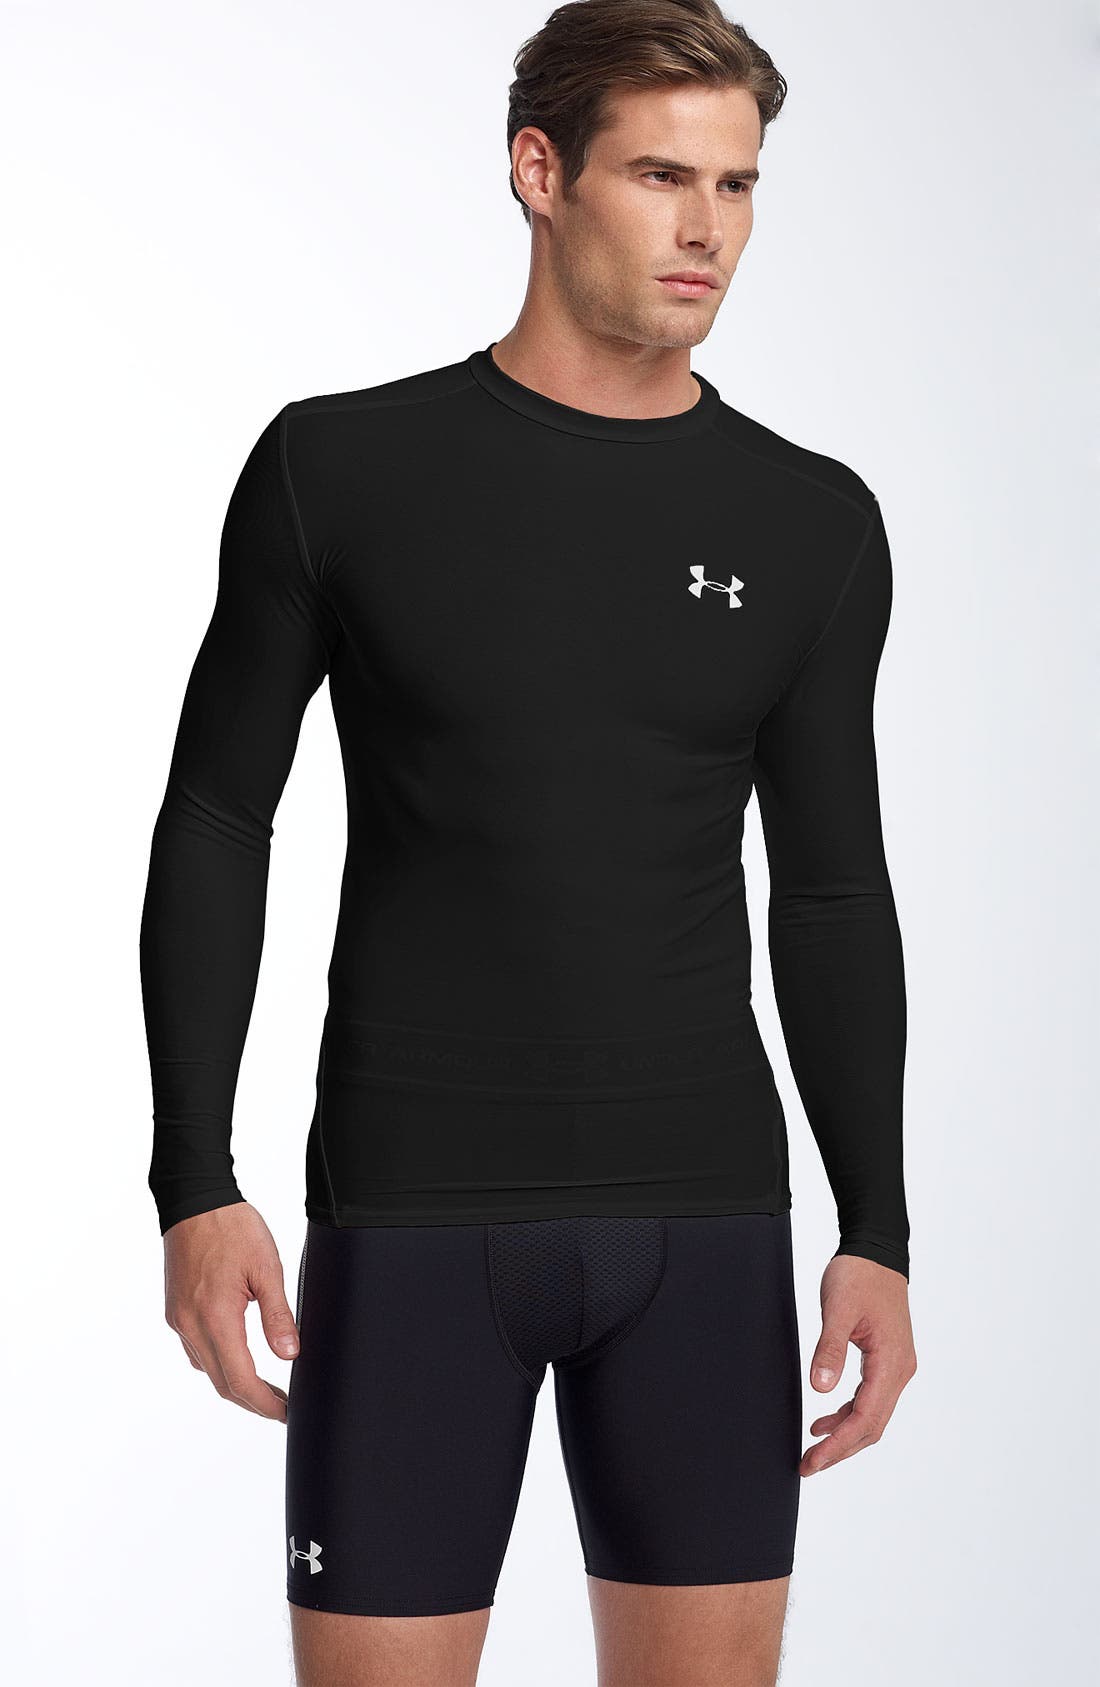 long sleeve under armour compression shirt